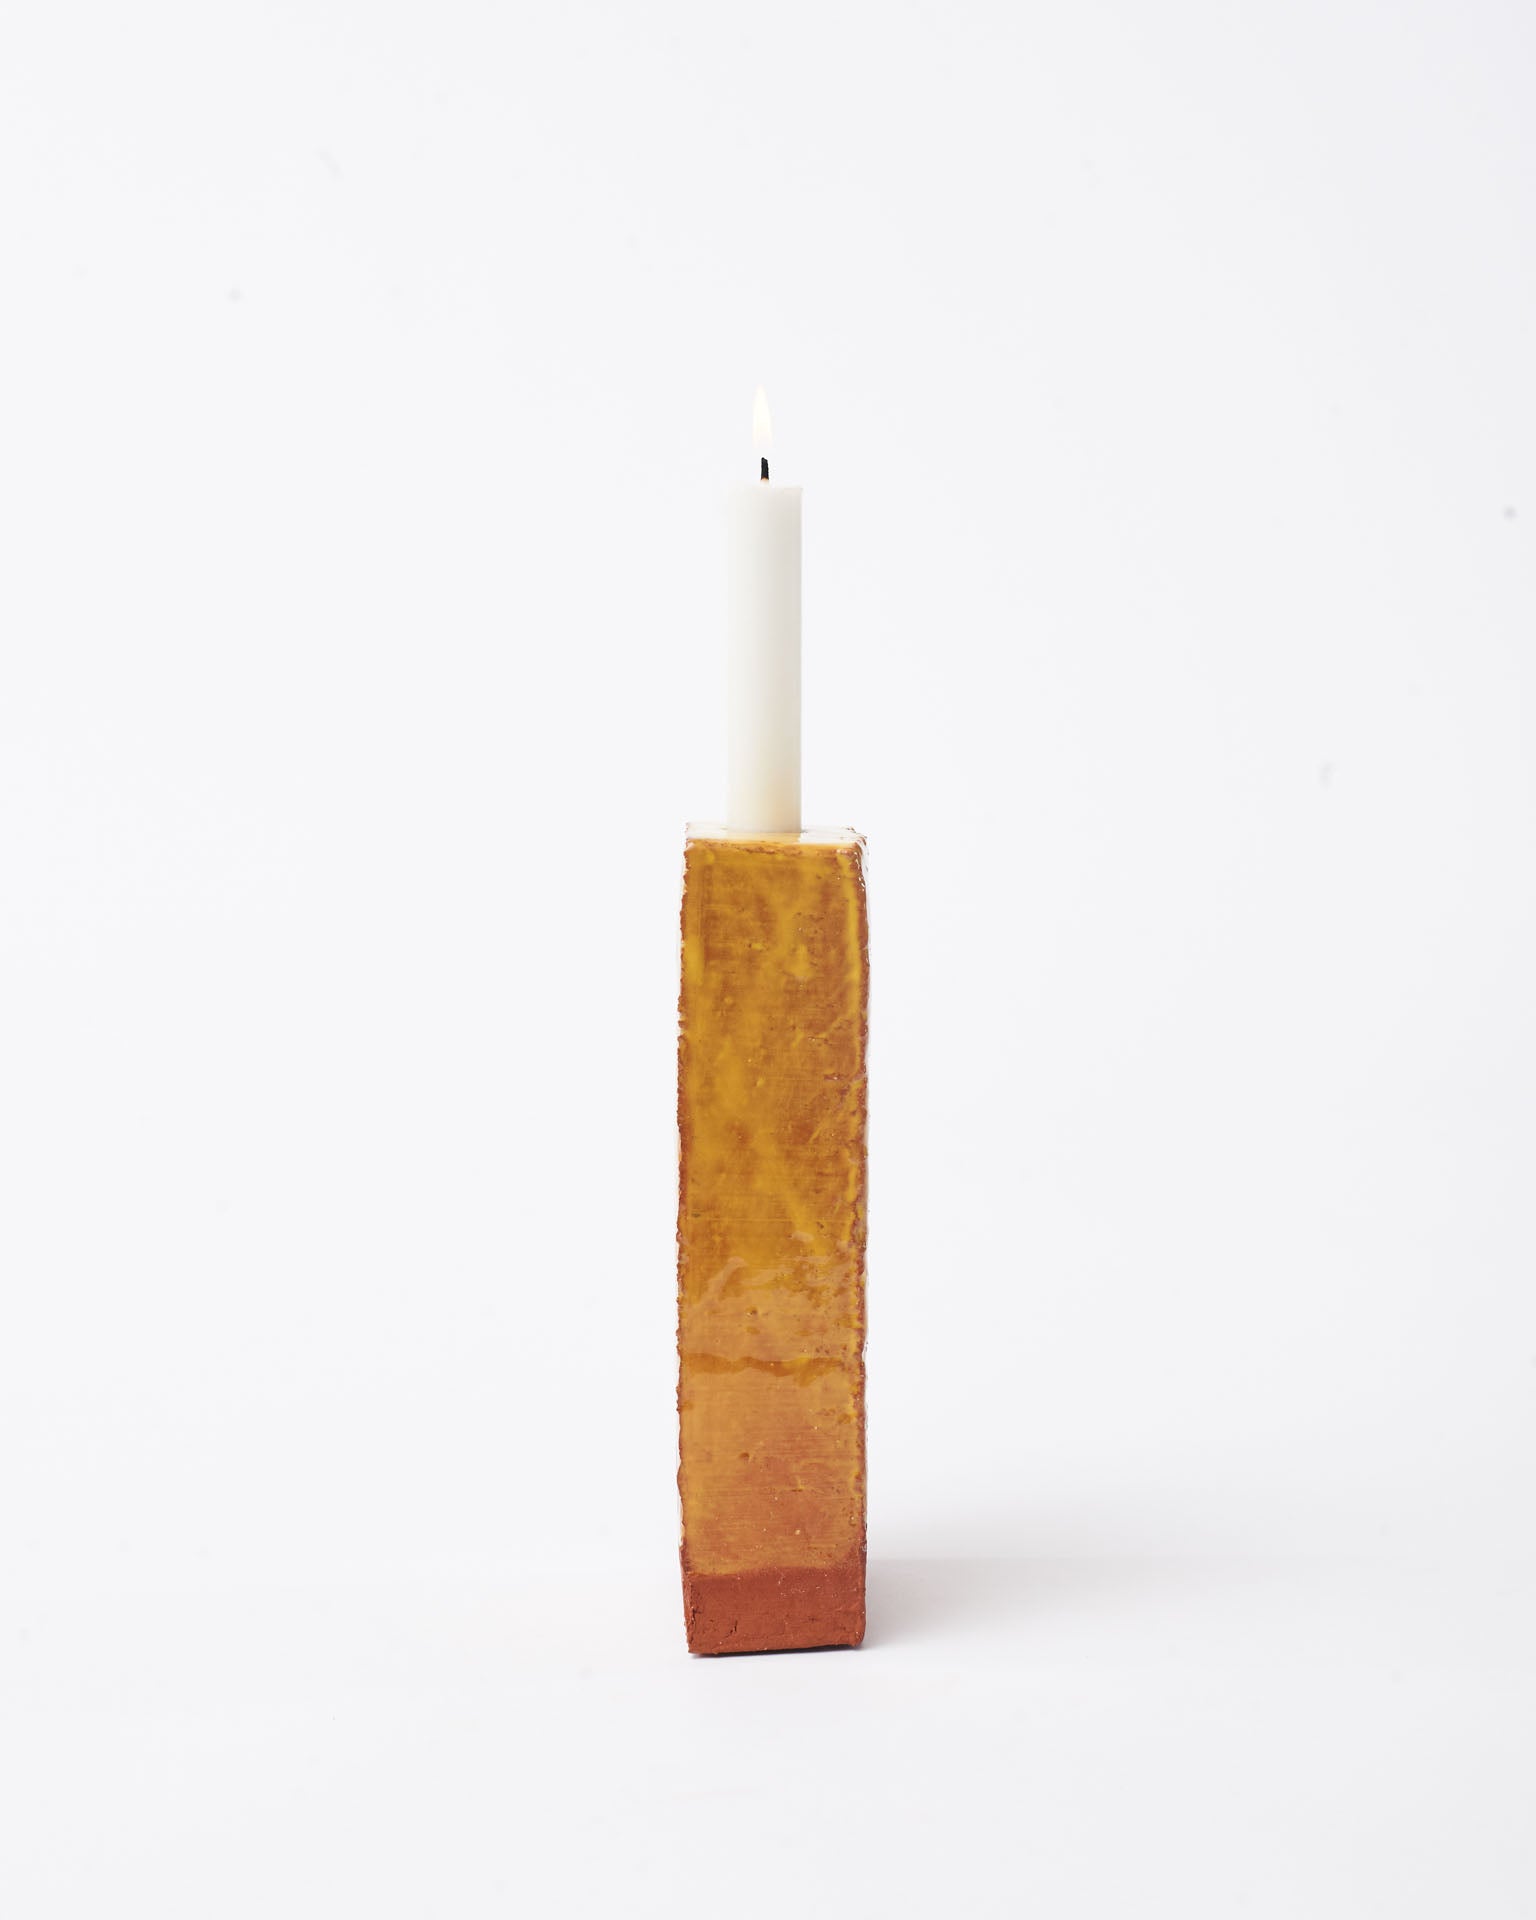 Handmade yellow brick ceramic candle holder in white glaze in white background with right side view